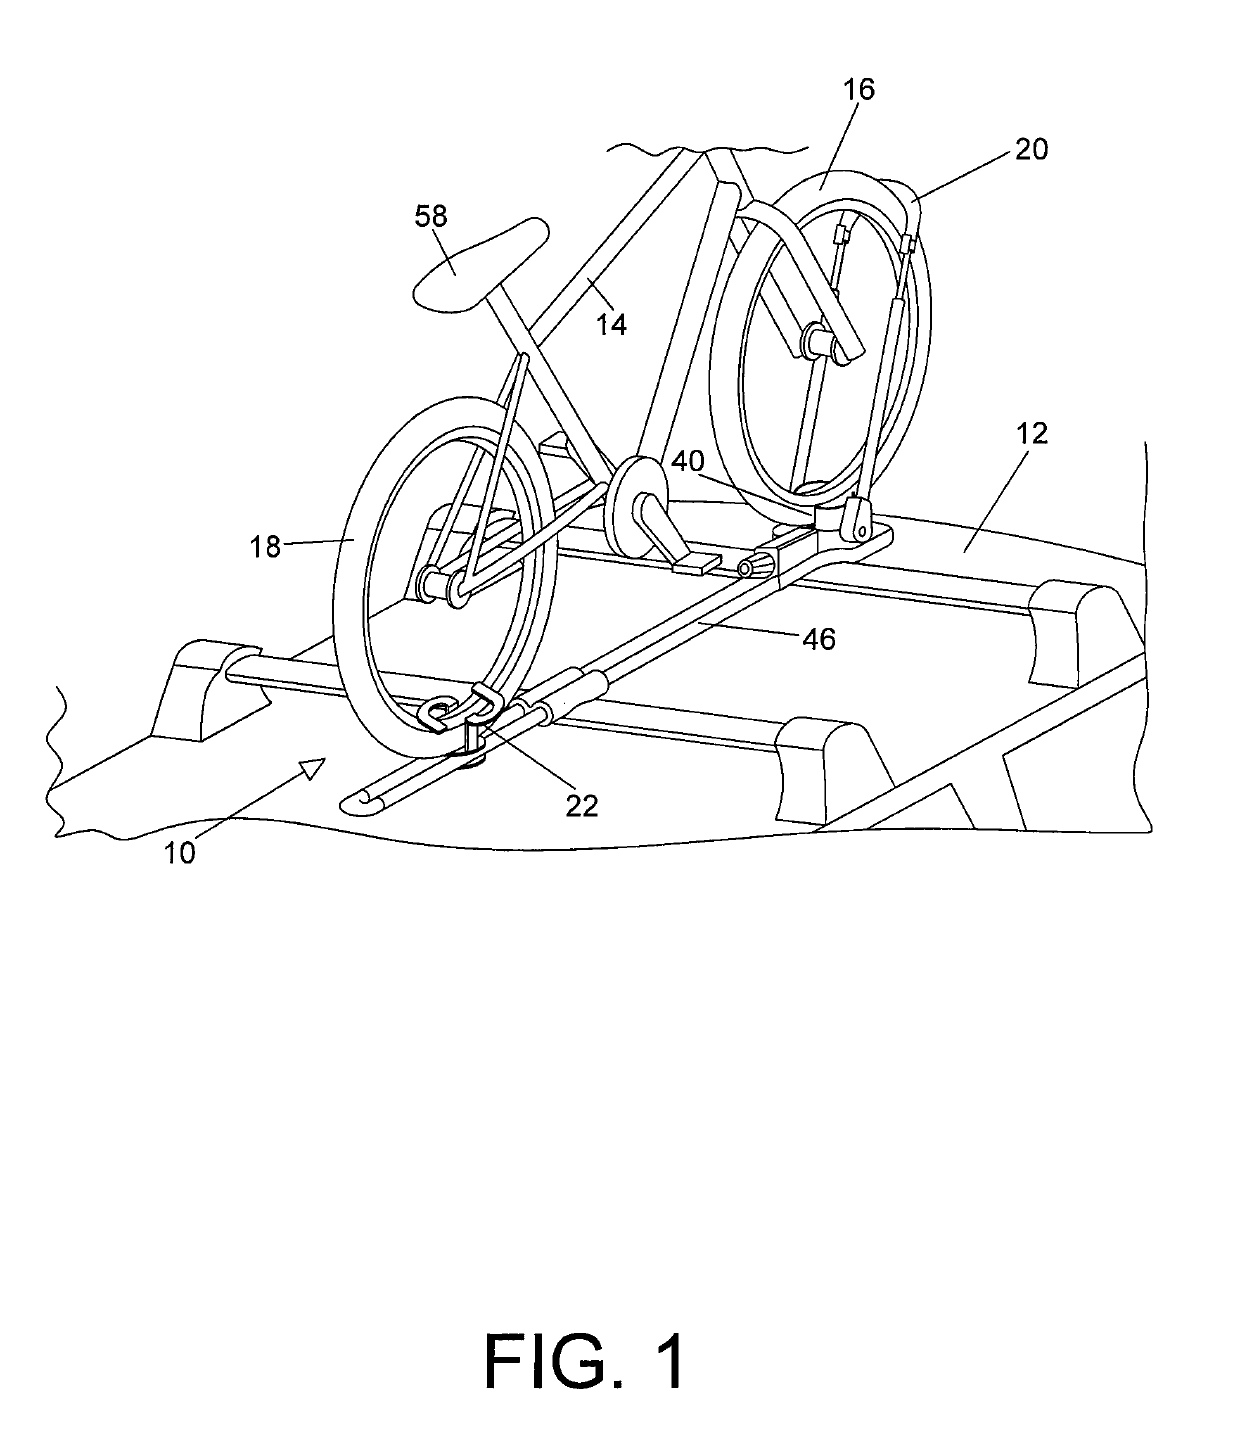 Method and system for carrying a bicycle on a vehicle